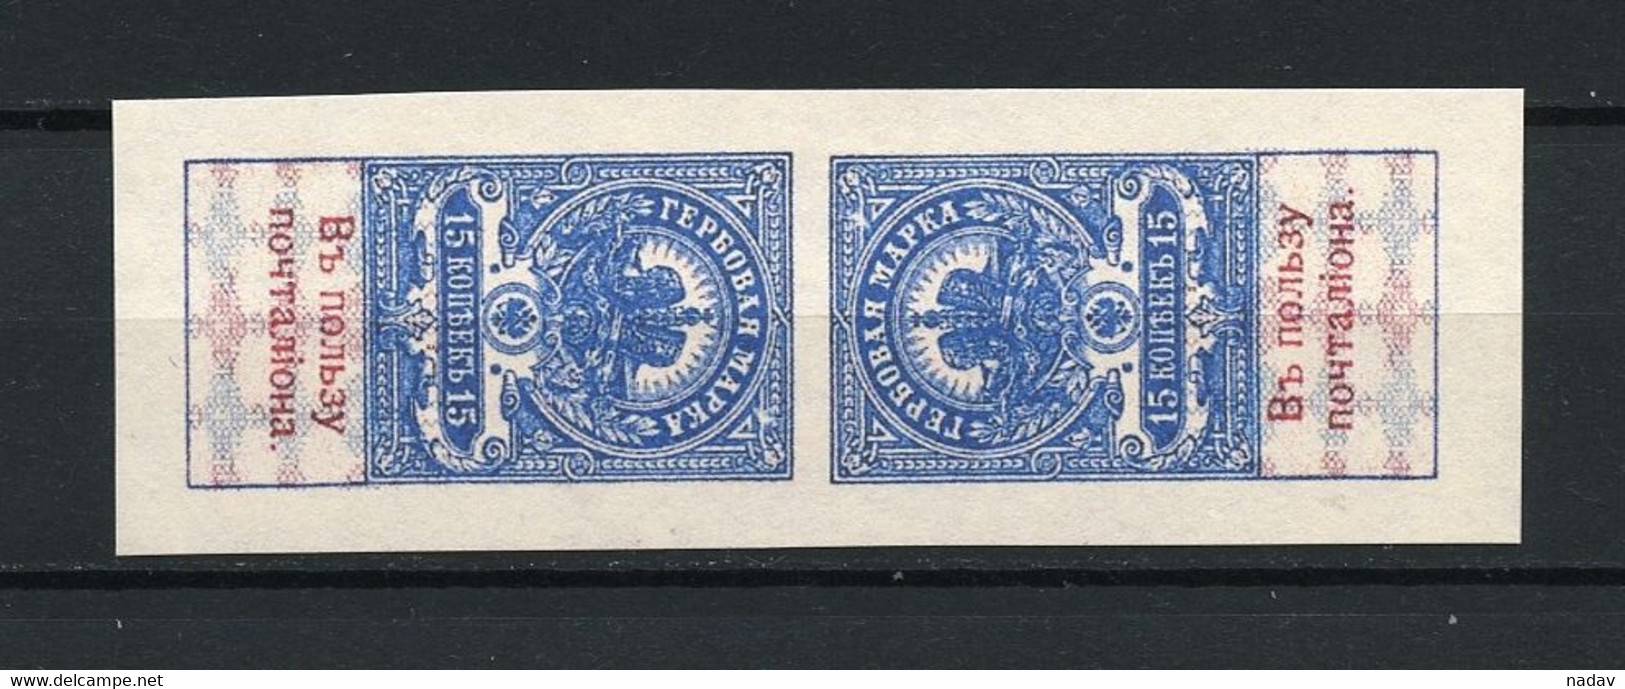 Russia -1909- Imperforate, Tete-beche, Reproduction - MNH** - Proeven & Herdrukken